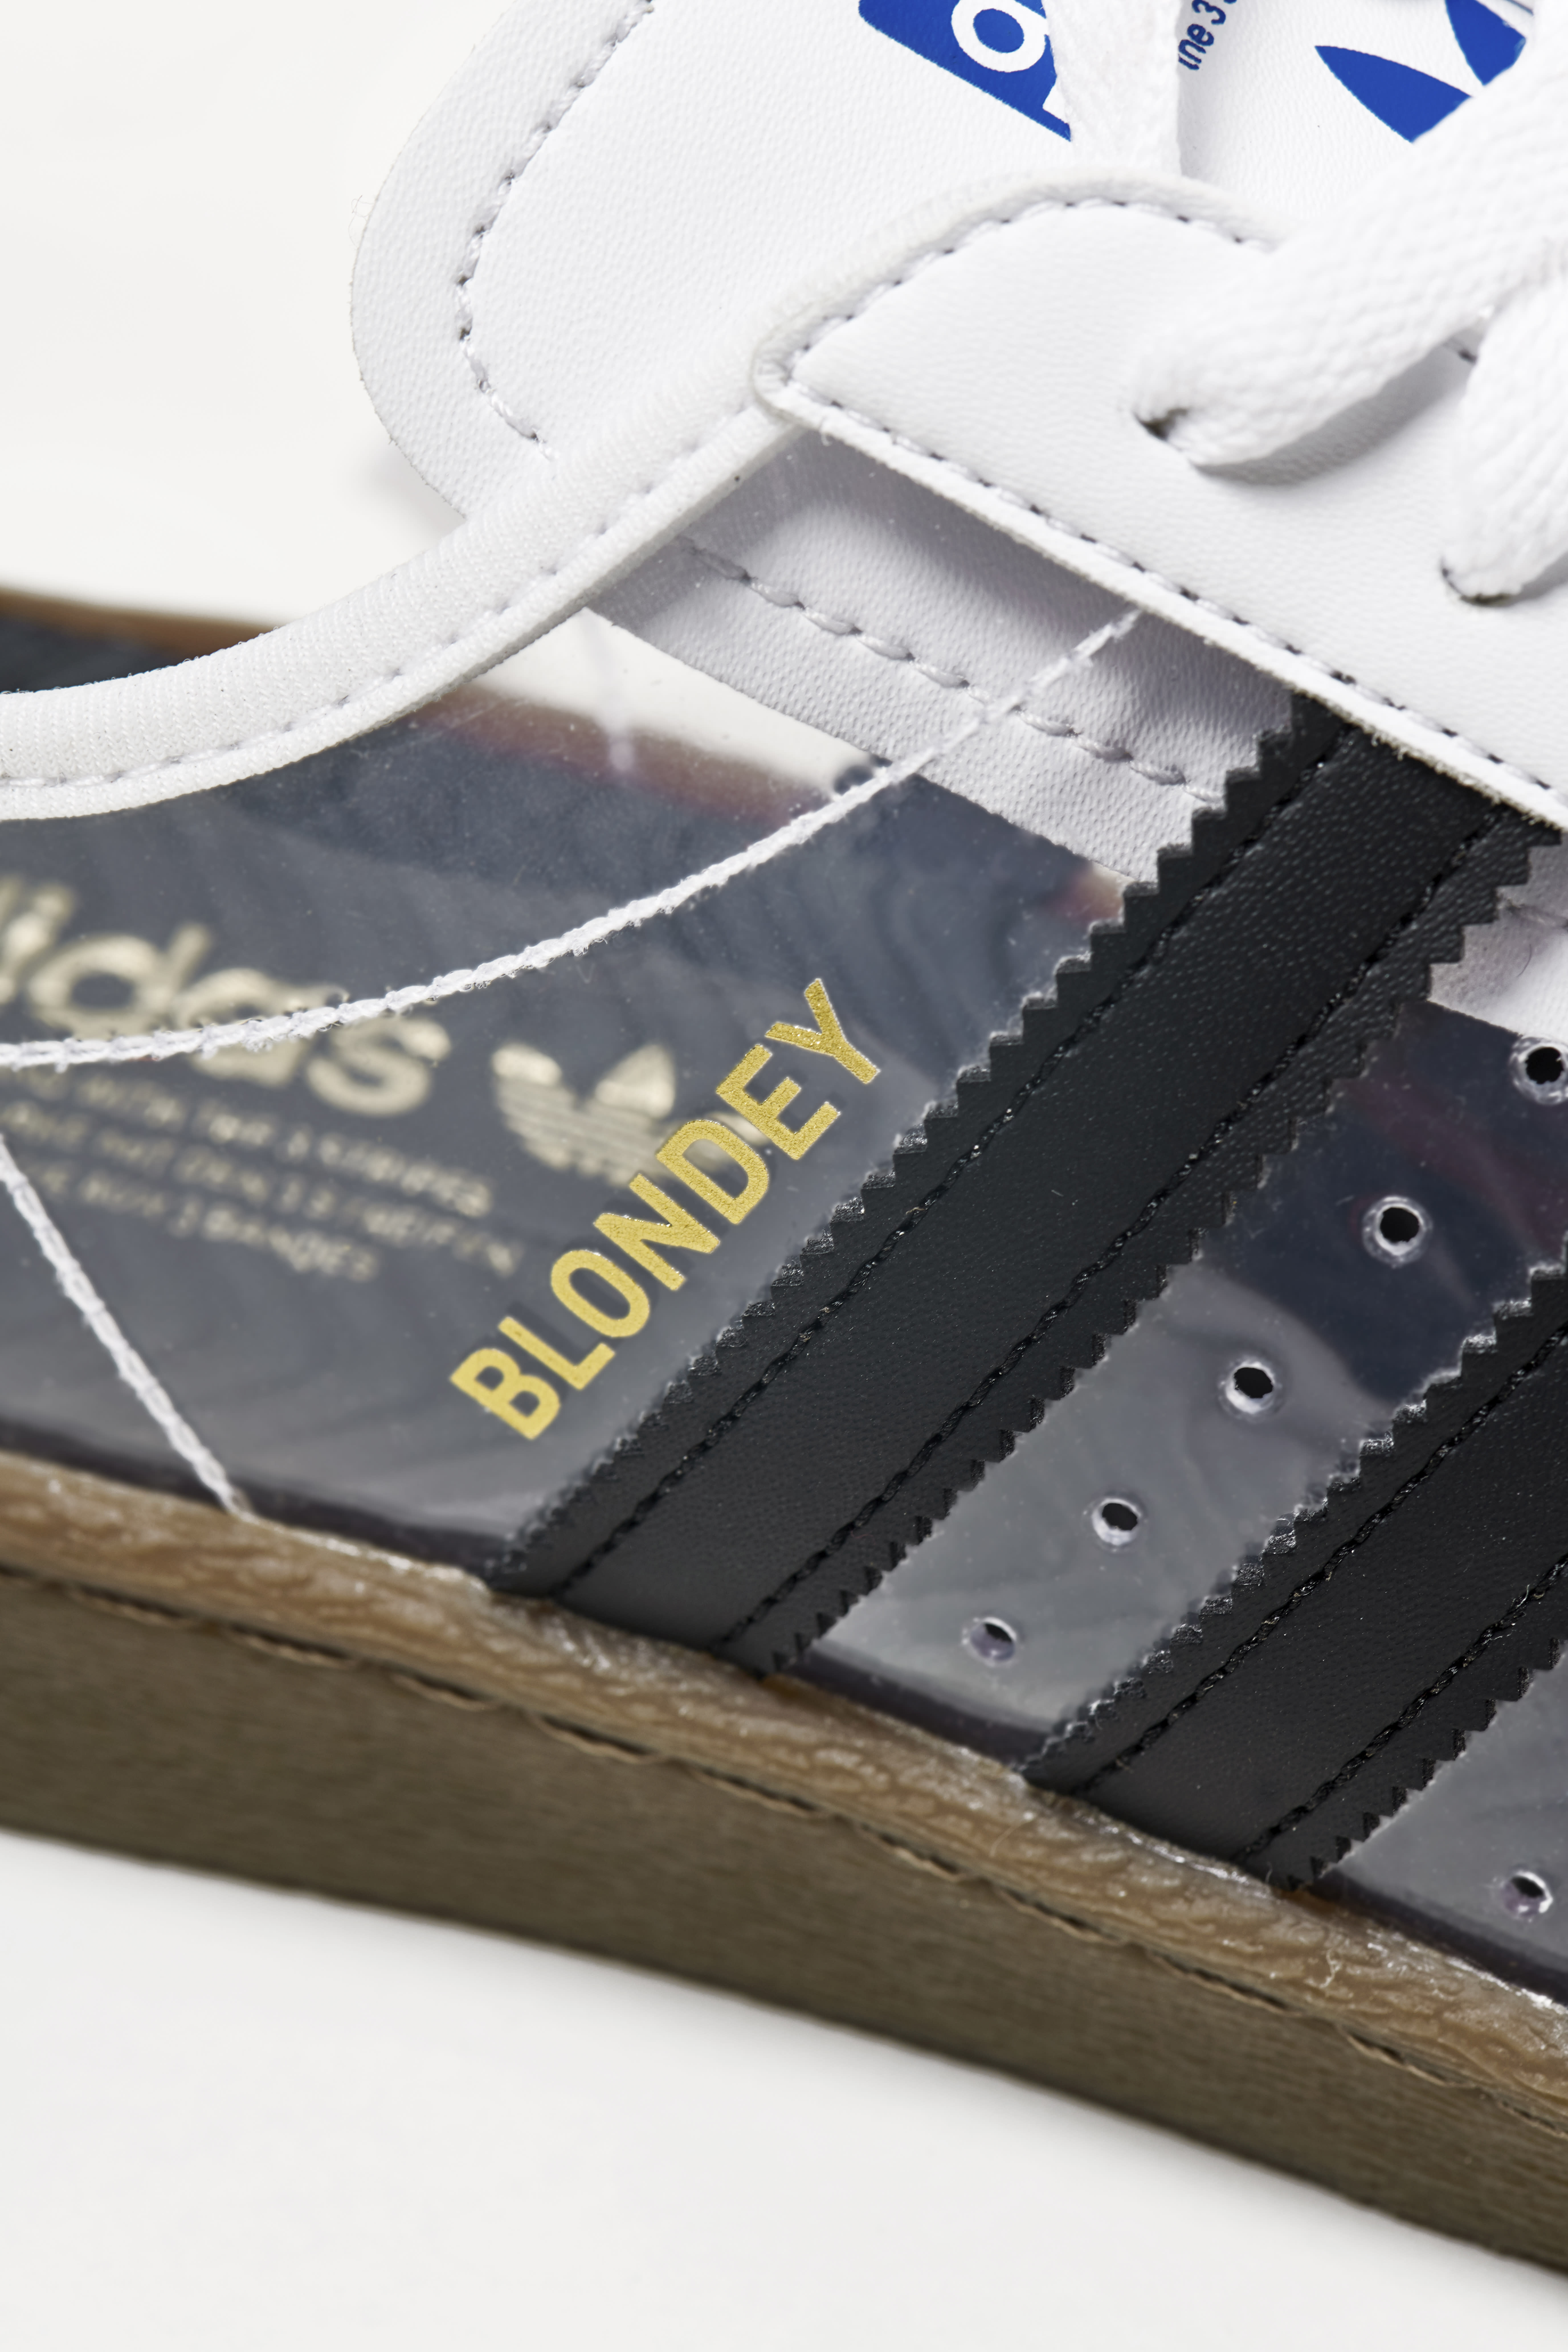 blondey-mccoy-adidas-superstar-80-lateral